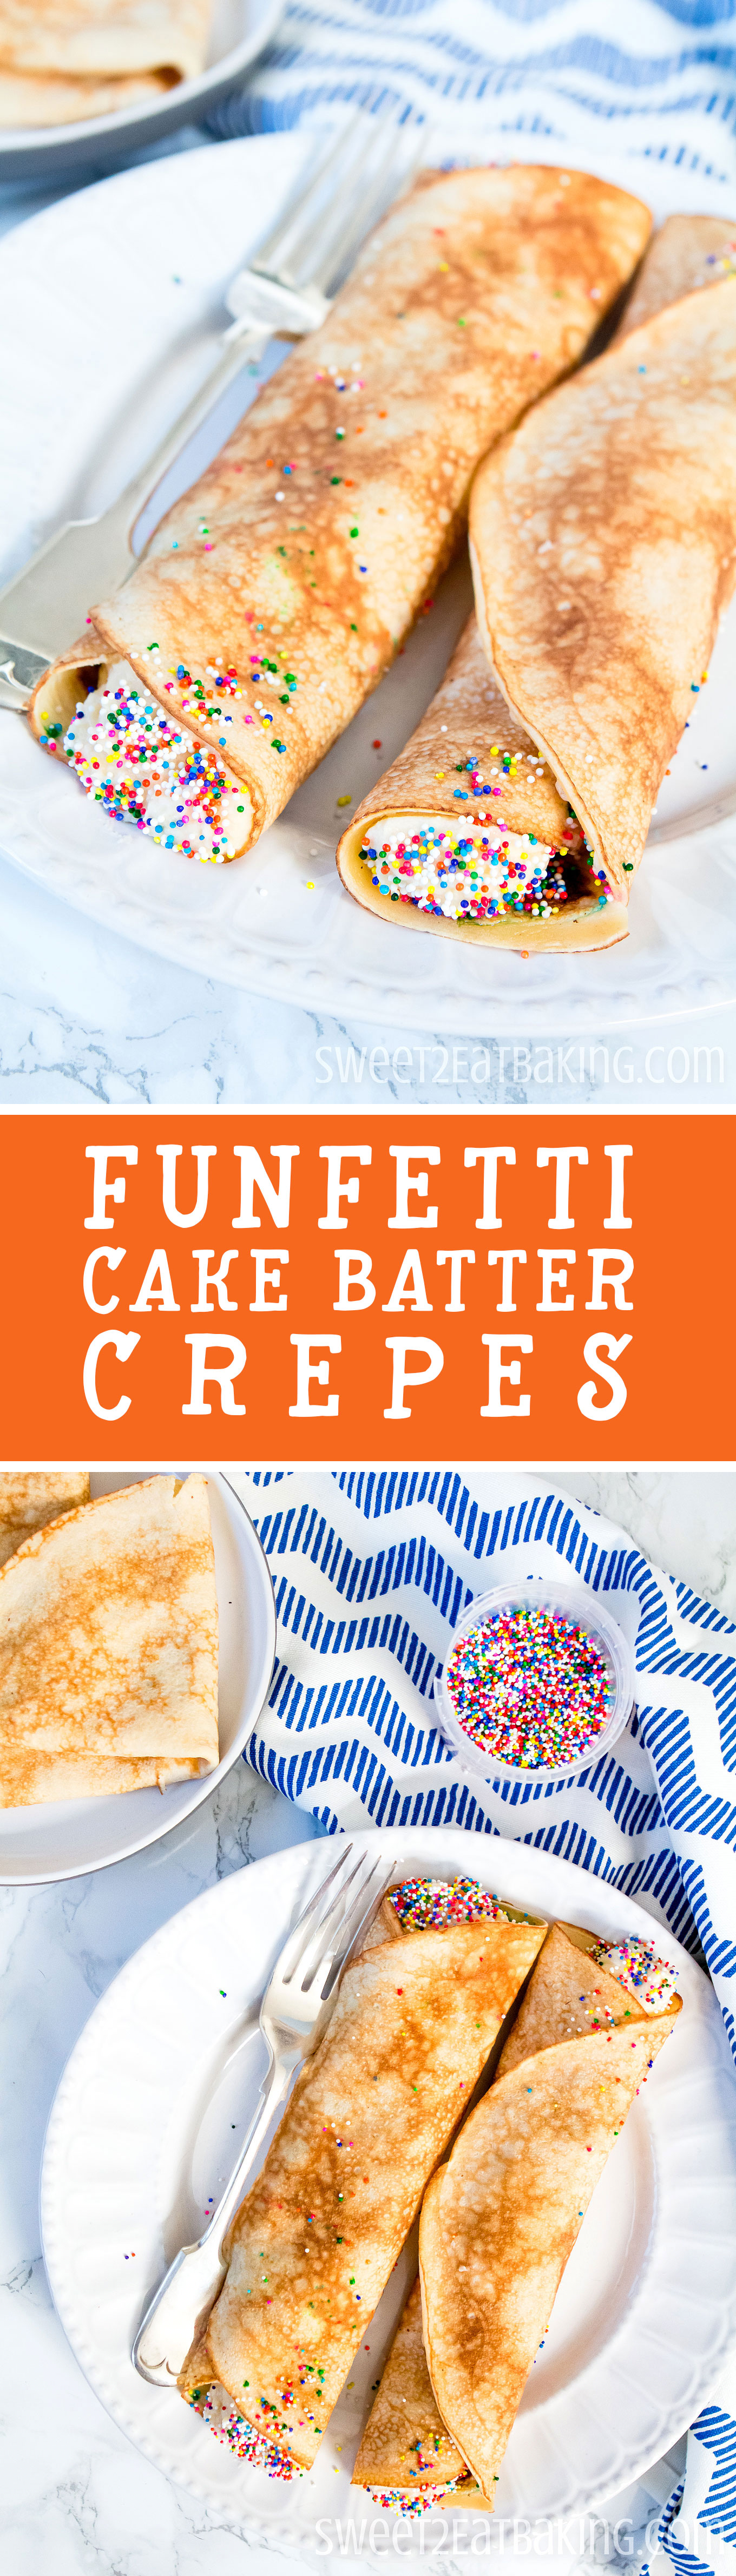 Funfetti Cake Batter Crêpes (Pancakes) Recipe by Sweet2EatBaking.com | These Crêpes taste just like cake batter and are the perfect treat this Shrove Tuesday (aka. Pancake Day or Pancake Tuesday). Made with cake mix both in the crêpe batter and the buttercream frosting, these crêpes will be your new favourite recipe